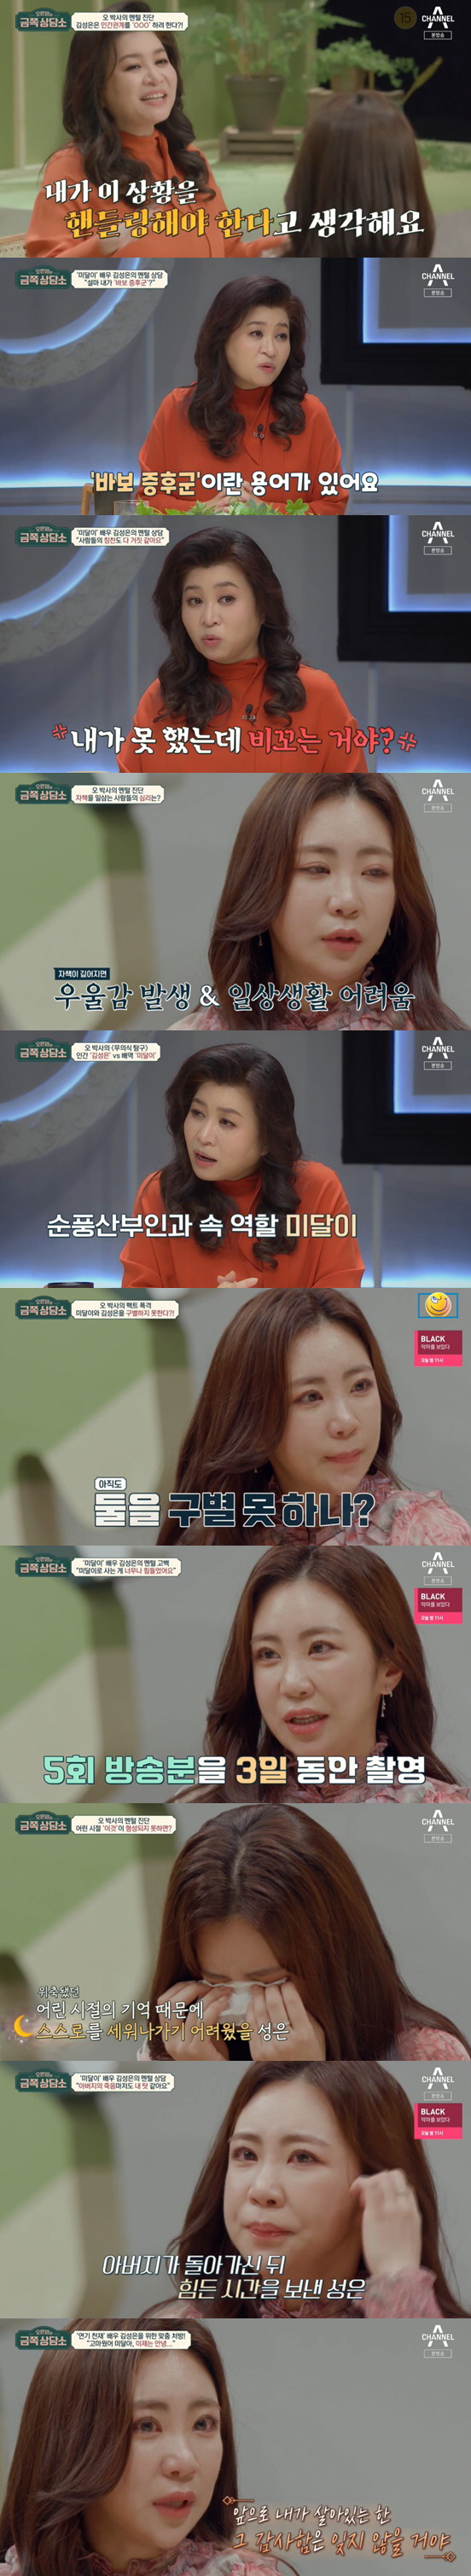 Oh Eun-youngs Gold Counseling Center Kim Sung-eun showed tears as he recalled his difficult childhood actor days.On the 15th channel A Oh Eun-youngs Gold Counseling Center, Actor Kim Sung-eun was shown to be worried.The first customer was Actor Kim Sung-eun, who perfected the role of underachievement in the sitcom Sunpoong Obstetrics and Gynecology.Asked about the current situation, Kim Sung-eun said, I played theater, musical, and went back to school last year.Kim Sung-eun, who had gained a sensational popularity with his role of underdog at the time, was surprised to find that he had shot about 30 commercials, and also set up my house at the age of nine.Kim Sung-eun, who had been able to enjoy such popularity and bright, surprised Oh Eun Young Doctorate and MC by saying, If something bad happens, it is my fault.Kim Sung-eun said: I am extremely scared of the uncomfortable situation. When an uncomfortable atmosphere is created, I notice a lot.When my acquaintance becomes difficult with personal affairs, I feel like my bad energy has influenced me. He also continued to be somewhat surprised and heartbreaking Confessions that he was a homosexual because he knew the identity of the opponent who had a serious meeting because of his failure to expand his business.Kim Sung-eun said, I had a boyfriend who had a serious meeting for six months. He really cared about me, thought it was a hot love.I was shocked, he said. I thought I was like a ghost in everything.I feel so sick and sorry, and I do not think that everything seems to be because of me. Oh Eun Young could not hide his worried expression at the end of Kim Sung-euns saying that whatever bad thing was my fault is endless.Oh Eun Young has been seriously analyzed by Kim Sung-euns story and has been in a sharp analysis. He has been in a fool syndrome that blames me for everything when I am in a bad situation.Oh Eun Young said: Mr. Sung seems to think that in a meaningful relationship I should handle this situation.So if things get worse, I think its all my fault. Im overreflectioned. Kim Sung-eun said, I can not fully receive peoples praise.I do not think I can do it, but I think its raining. He asked, Do you not trust your ability? Oh Eun Young was heartbroken by Kim Sung-euns unexpected Confessions, which was called genius child actor for his outstanding acting skills.Kim Sung-eun called the young Kim Sung-eun an unstable, busy, well-to-do, lonely child.When I thought of underachievement, I answered, I am the only one who comes up with tiredness. Oh Eun Young said, I still can not distinguish between underachievement and human Kim Sung-eun.If it is not distinguishable, it seems too difficult. In Oh Eun Youngs keen analysis, Kim Sung-eun was surprised to say, Its like a thriller movie. Before the underdog role, he was a really introverted child.I had to memorize the script within hours, and I had to sleep in the waiting room and shoot hard in the waiting room.I was a lot of trouble, he explained, explaining the life of an actor when it was difficult for a child to handle.Oh Eun Young comforted him, I think it would have been difficult to build up myself because of the memories of my childhood that was shrinking. Kim Sung-eun said, I almost gave up my role because it was so hard.Kim Sung-eun also said, I think I have been buried for too long because my tendency and personality have been learned.I could not separate myself from the underdog. And when my father died and I did an autopsy, my father called me last.I could not forgive myself for not receiving my fathers last call. It was a lot hard after my father died. Oh Eun Young advised him to say goodbye to the underdog, saying, Specify the underdog and Kim Sung-eun.Kim Sung-eun, who met a underachiever who lived 25 years ago, said, I have been suffering so much, and there are so many good things I got thanks to you.I will not forget that gratitude as long as I am alive, but I will say goodbye here because I have to live my life as me.Ive been so grateful for it, he said, adding that he was obnoxious.